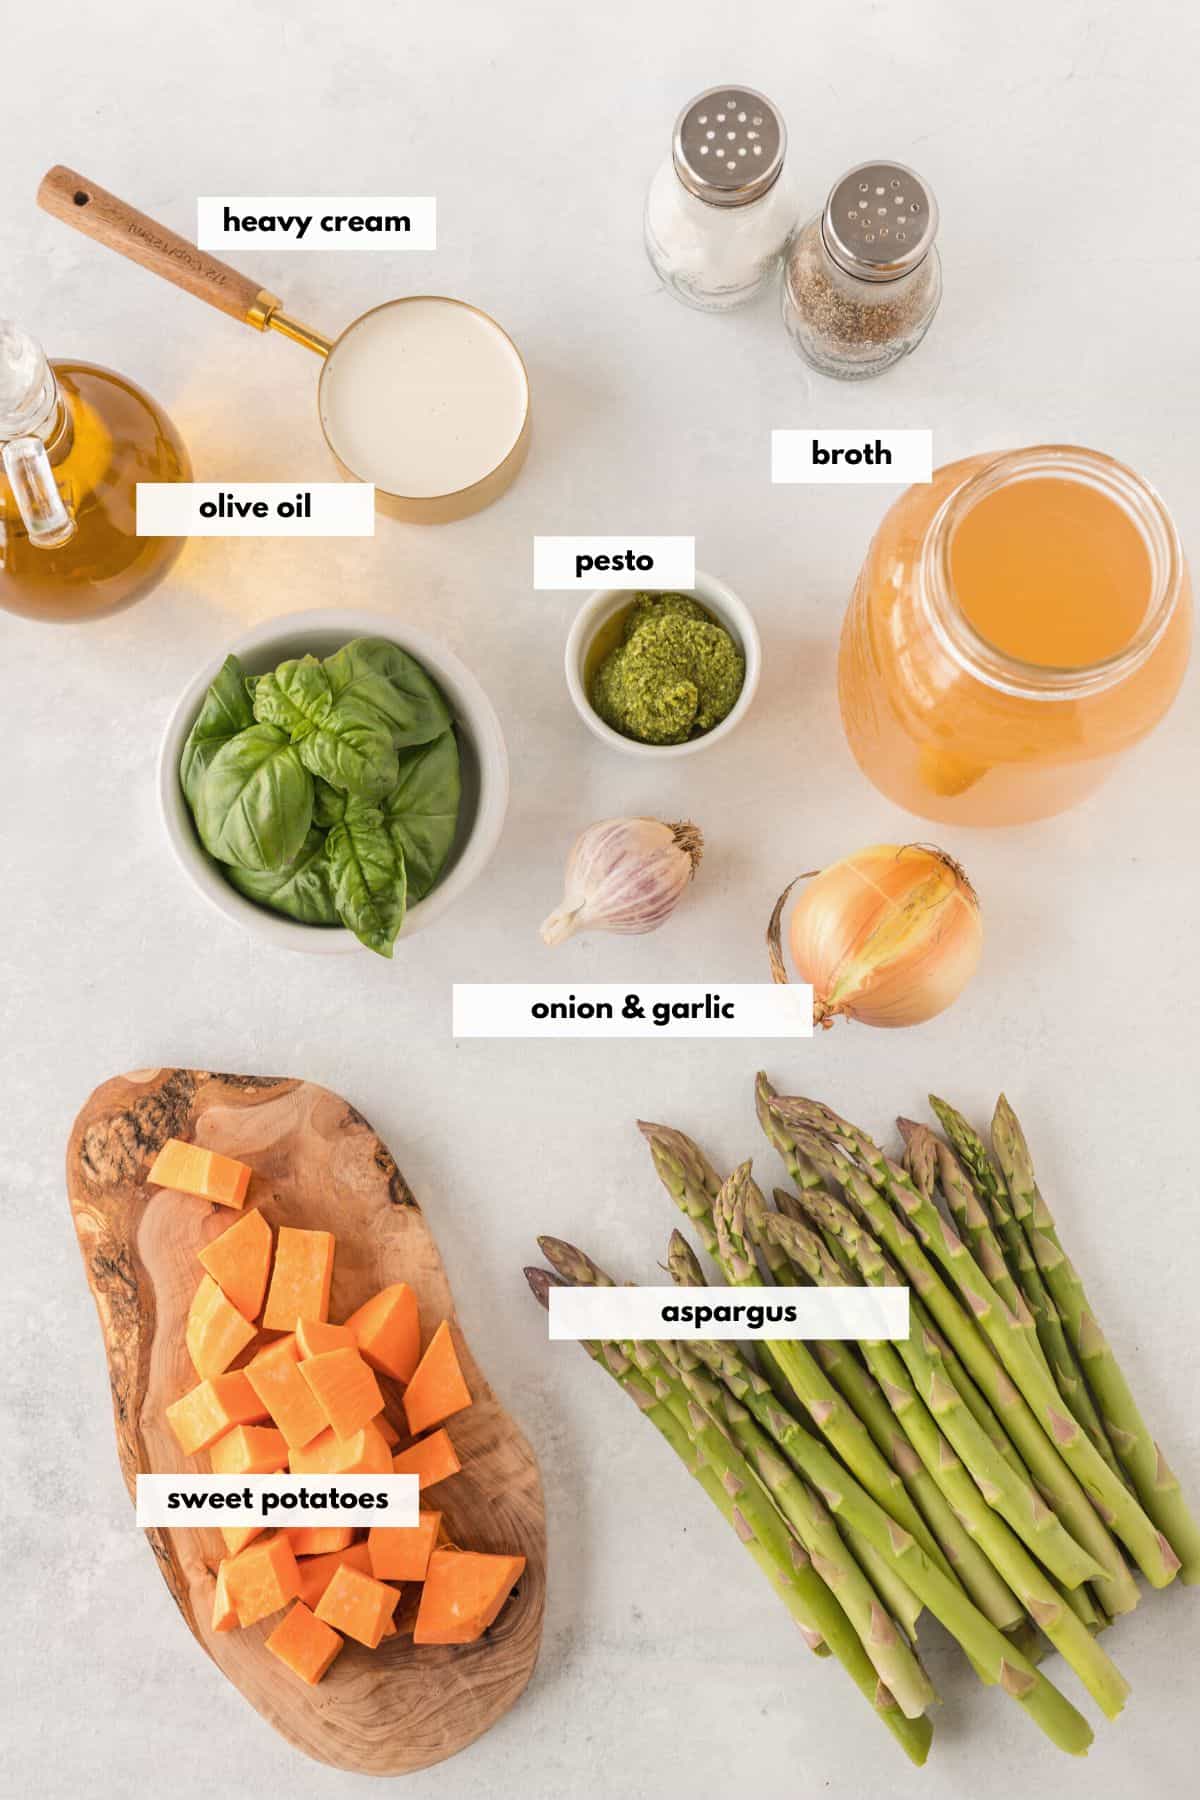 Ingredients for a healthier asparagus soup including sweet potatoes, broth, pesto, olive oil, garlic, onion and heavy cream.